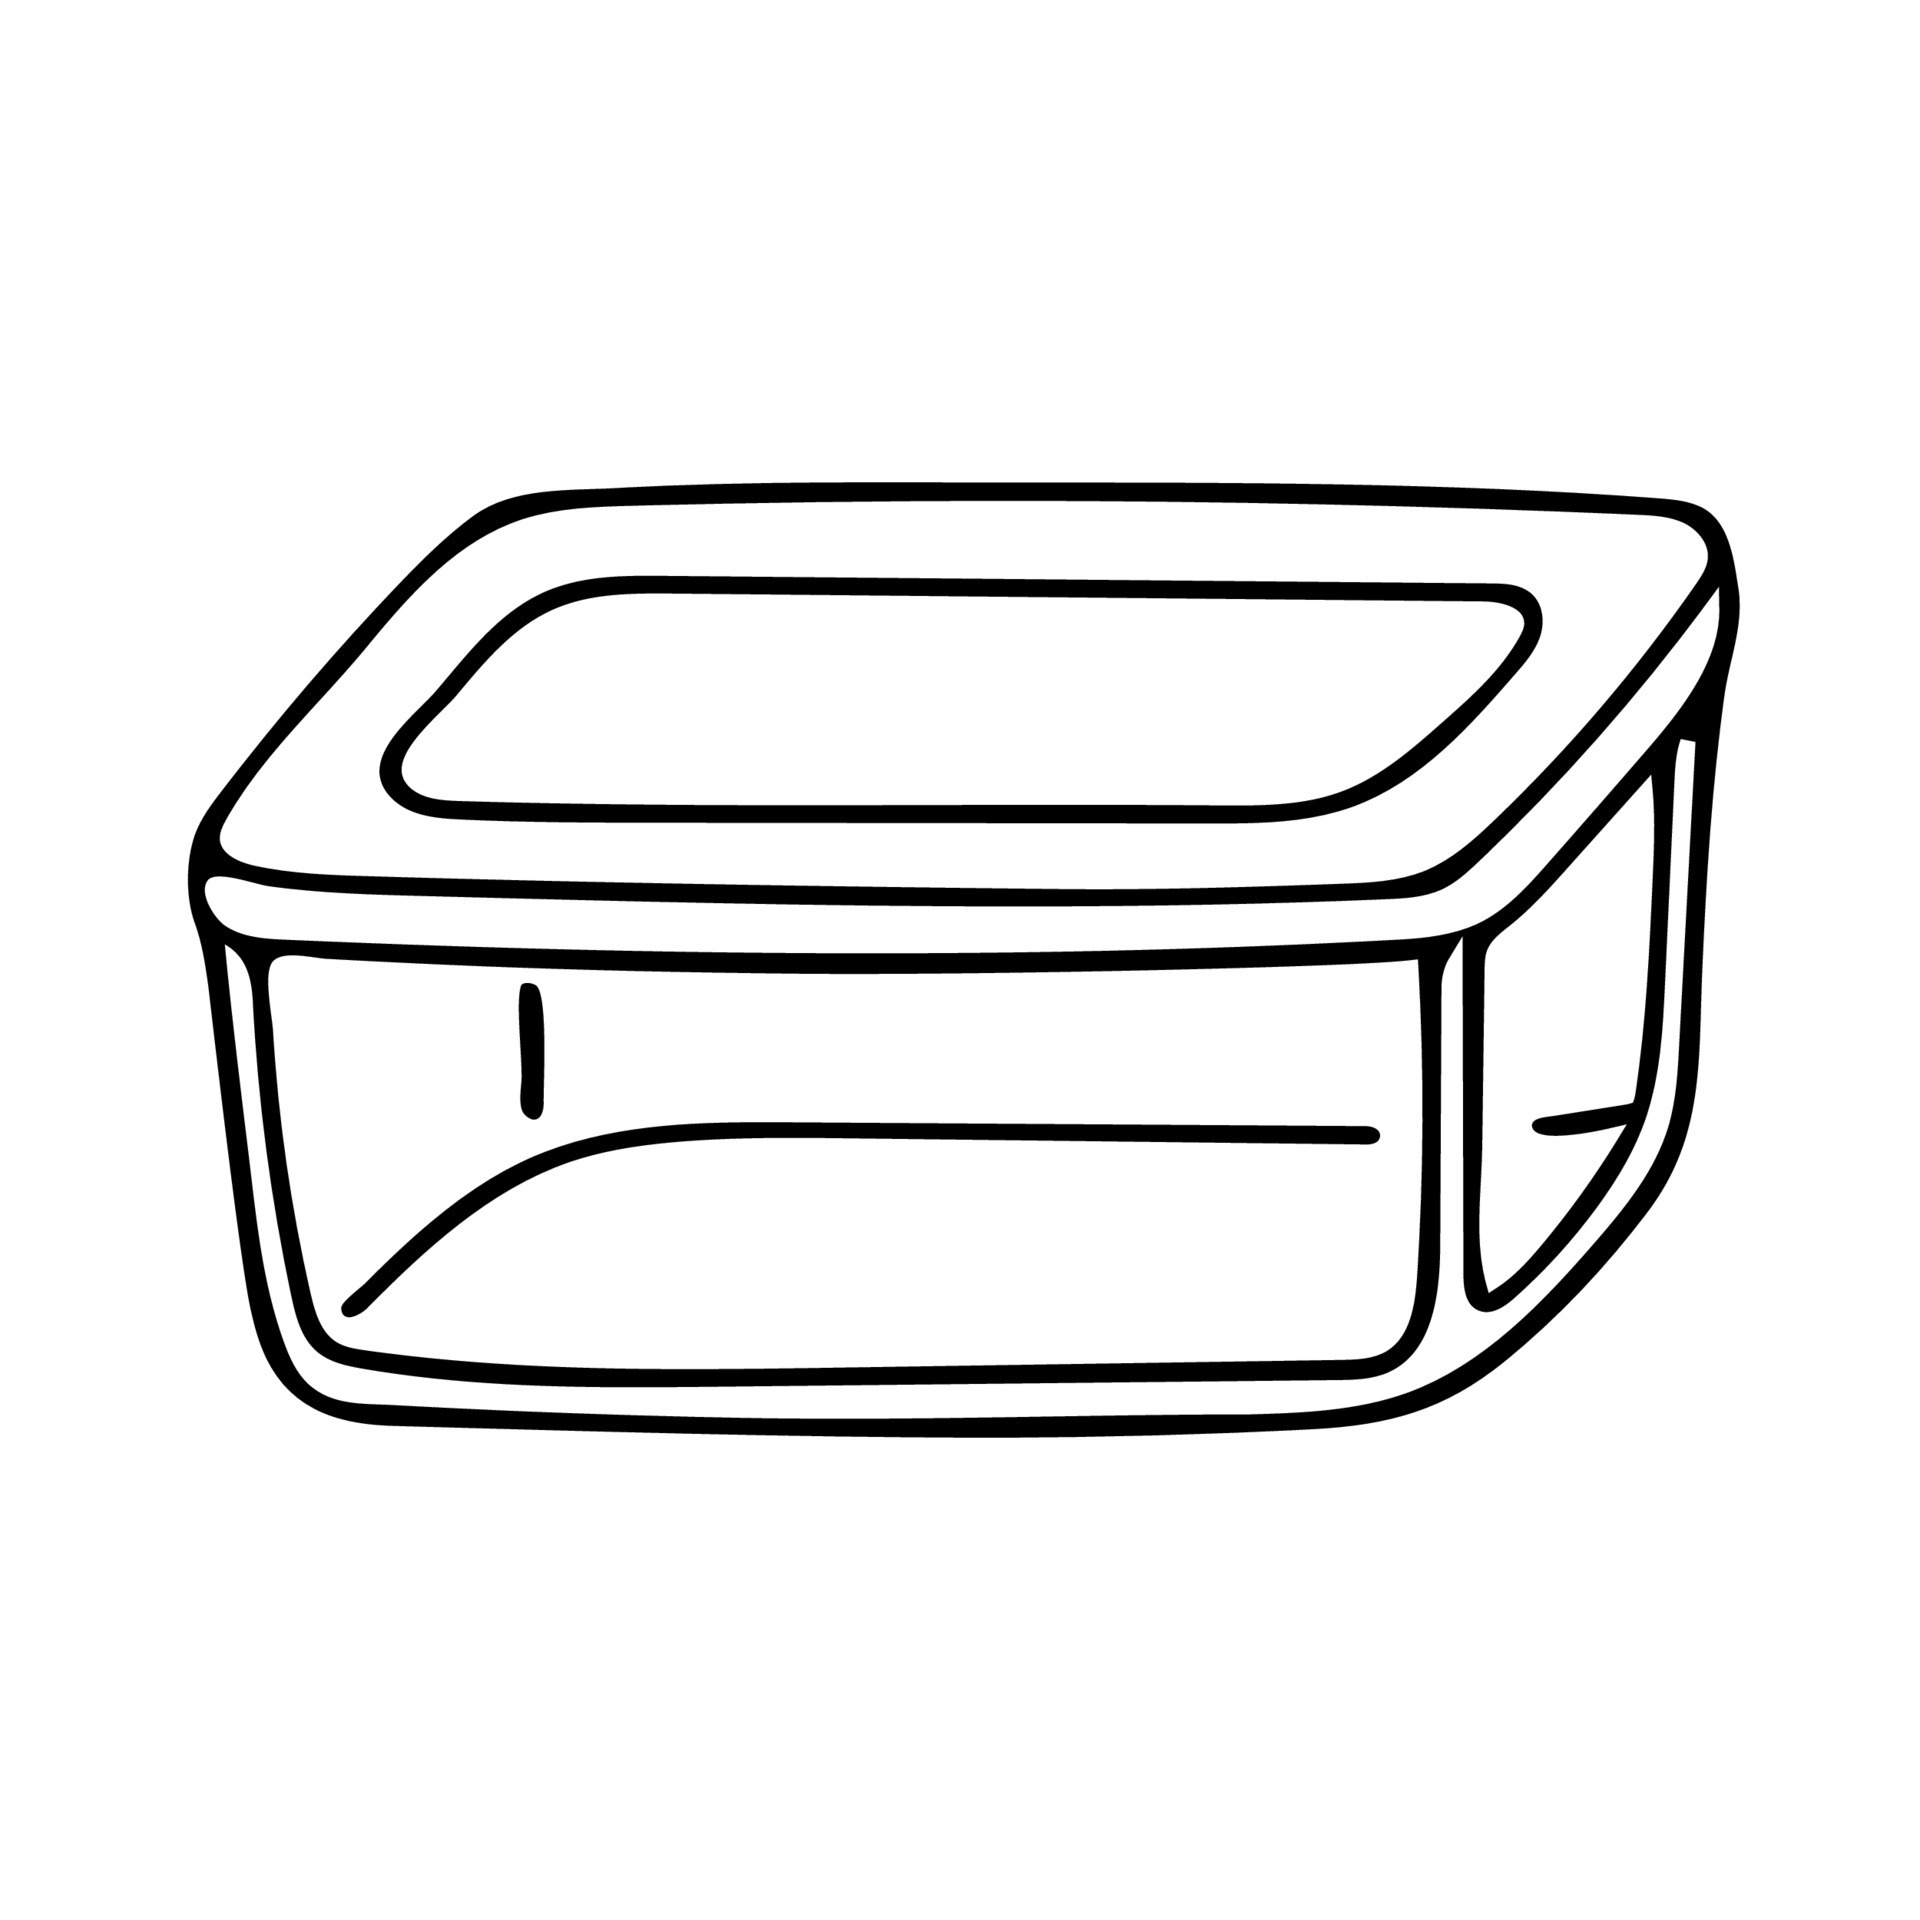 https://static.vecteezy.com/system/resources/previews/015/645/285/original/doodle-of-own-reusable-lunch-box-isolated-on-white-background-hand-drawn-illustration-of-ecological-and-zero-waste-food-container-vector.jpg